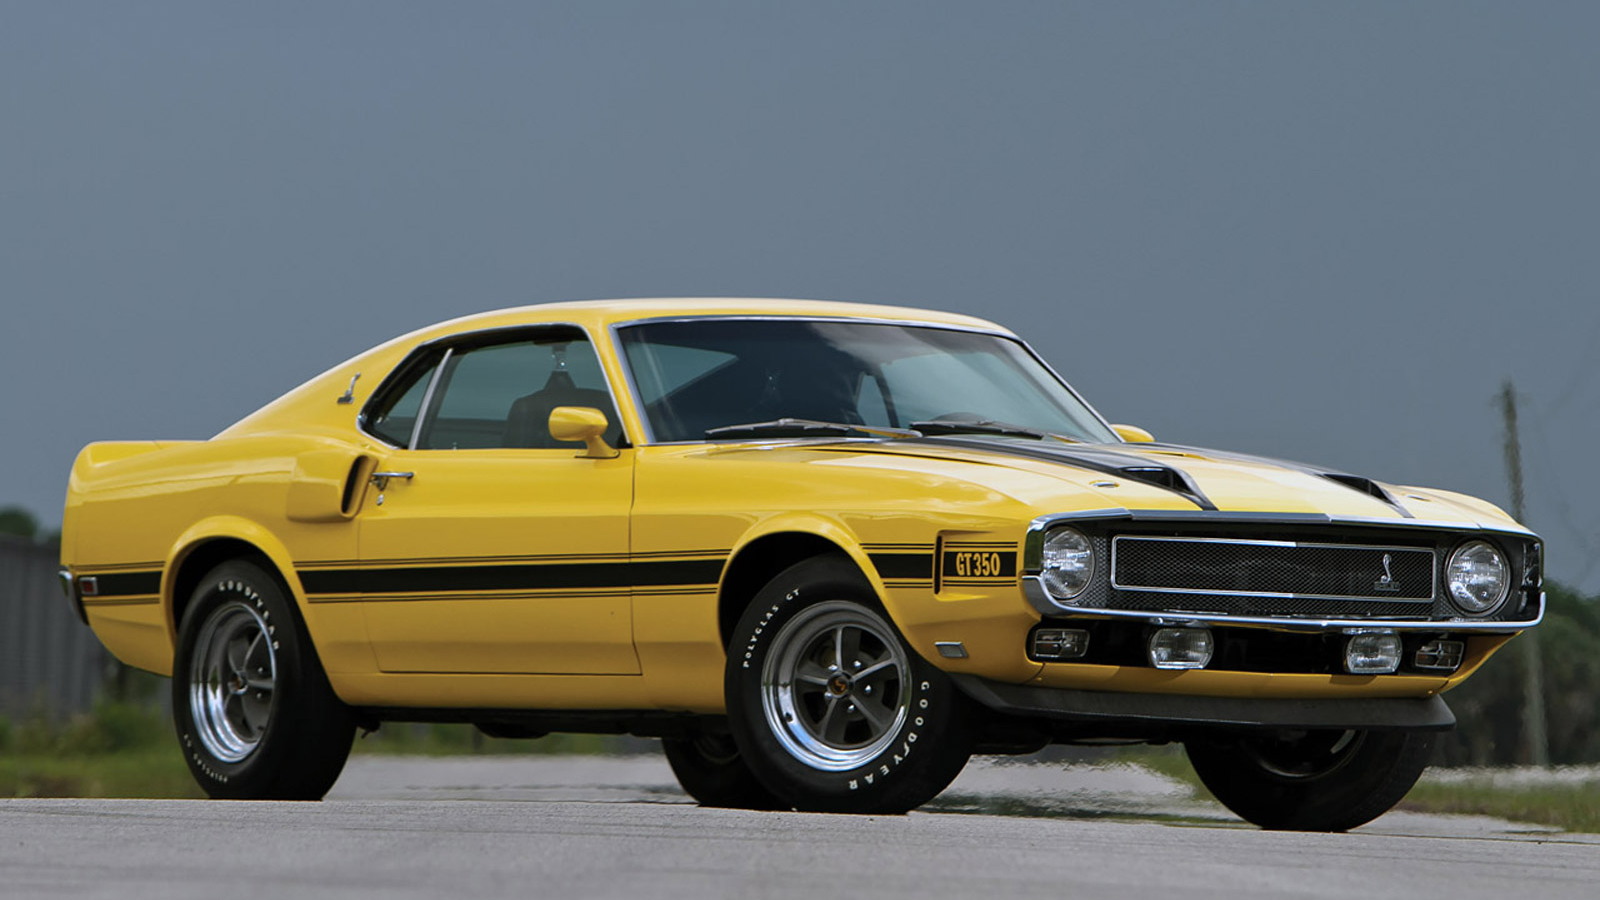 1970 Shelby GT350 - Image: RM Auctions